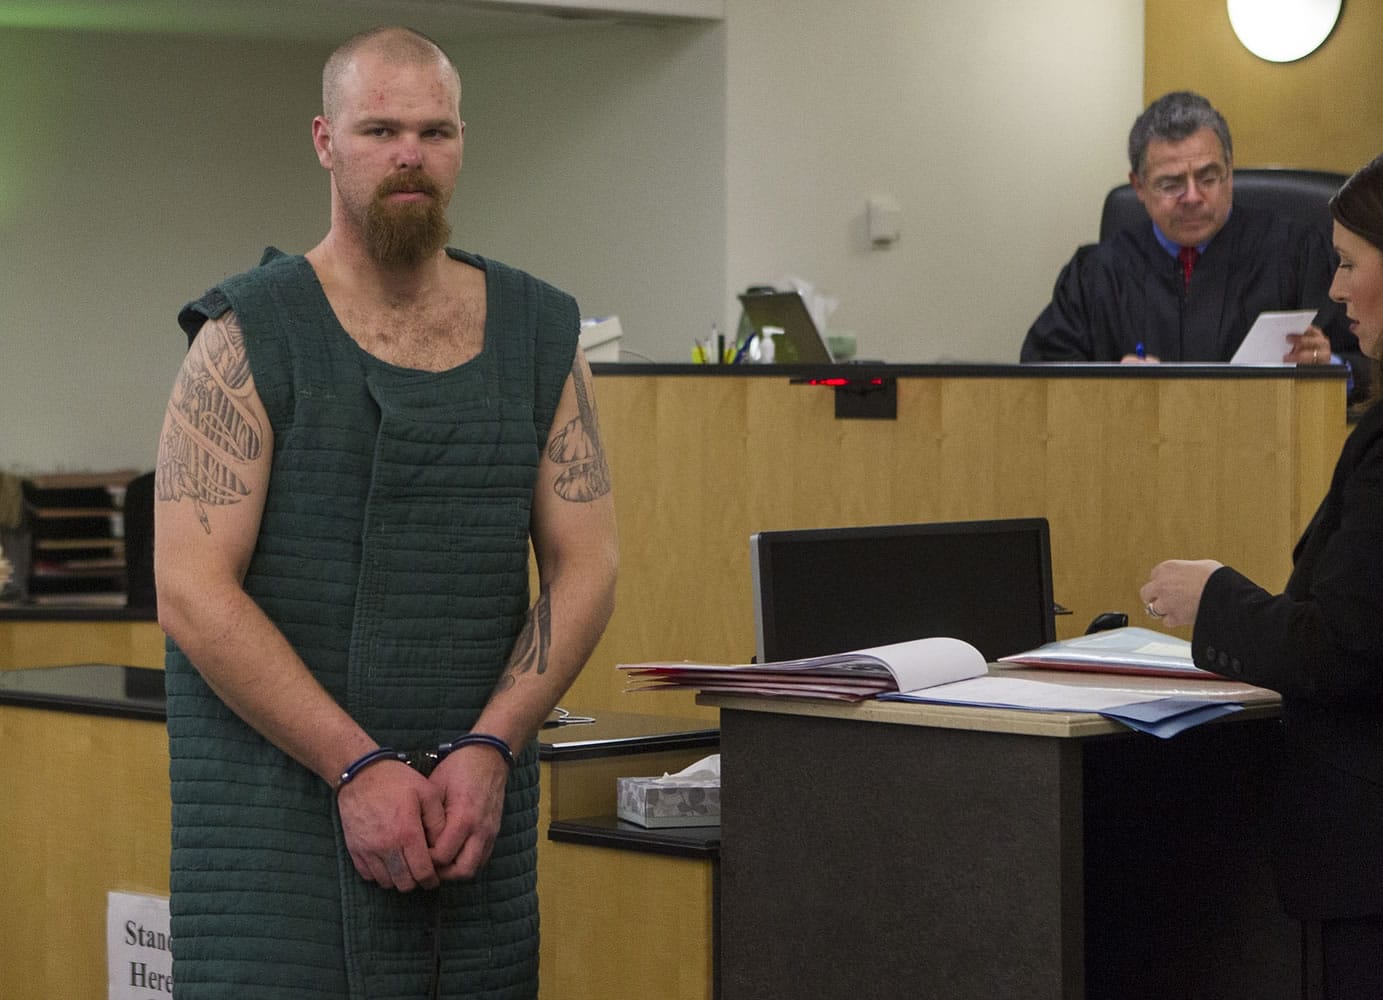 Brian Slay, 32 of Woodland, makes a first appearance in Clark County Superior Court on Dec. 29 for his involvement in an interrupted burglary and shootout in Amboy.